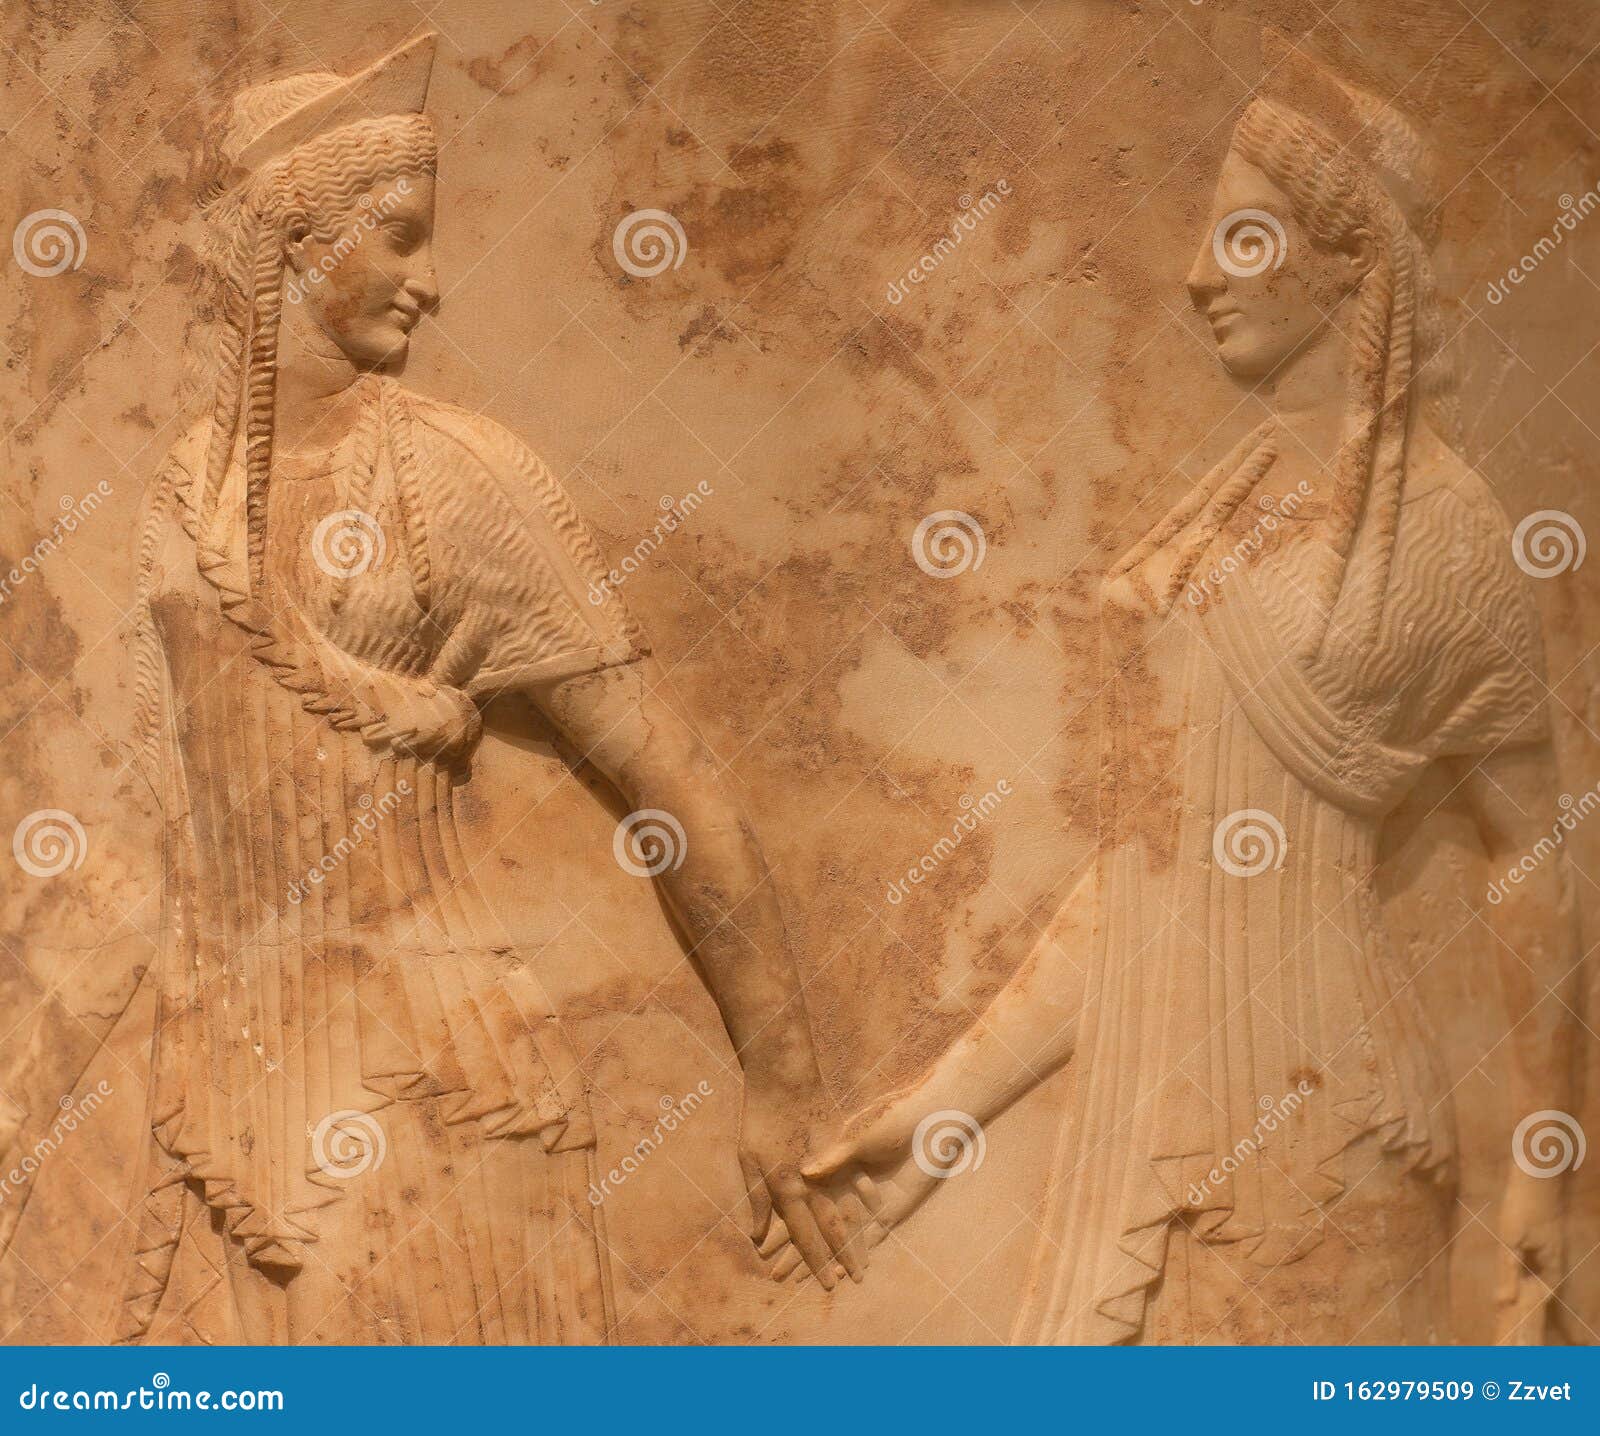 ancient greek bas-relief with two female figures, nymphs or graces holding hands and dancing